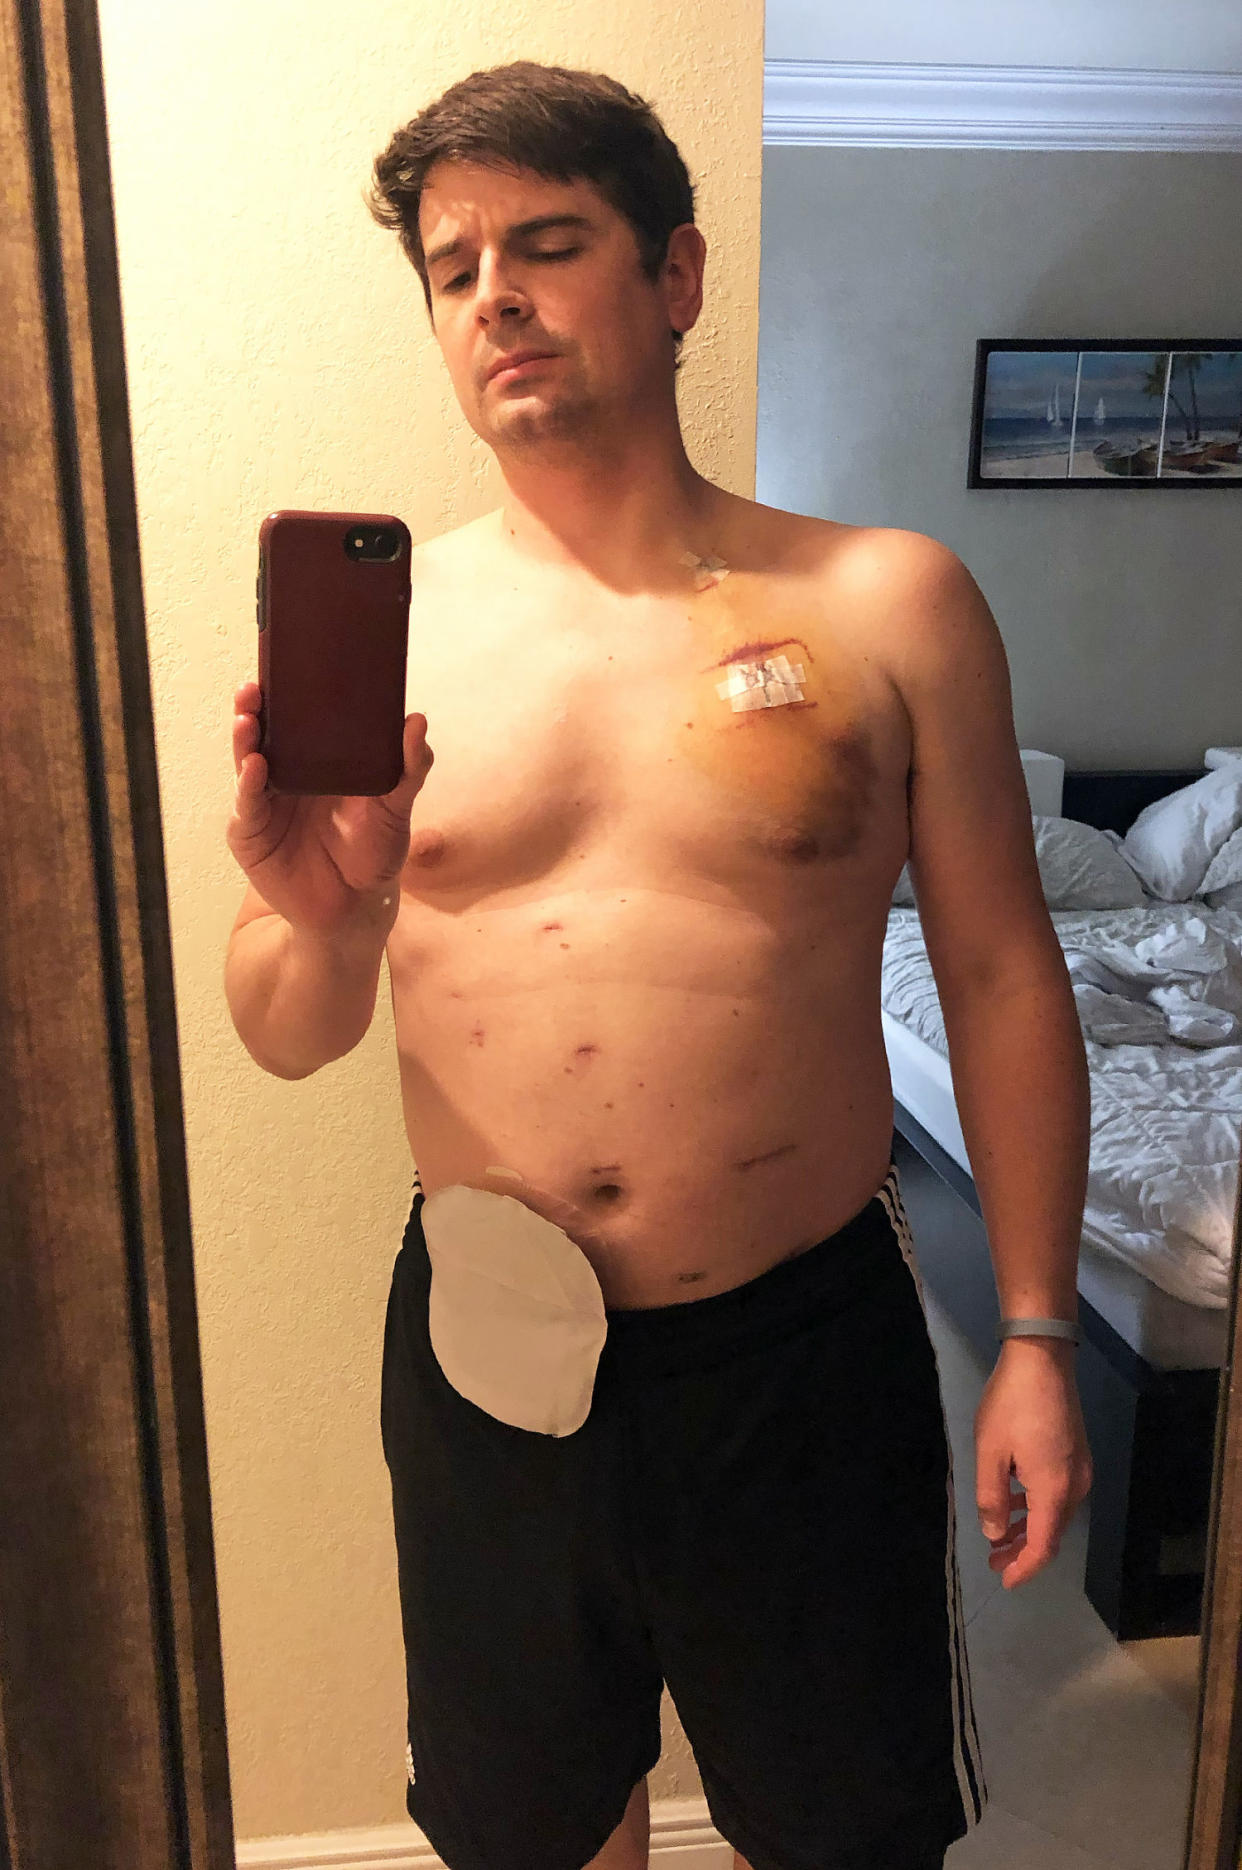 To help with his recovery, doctors gave Michael Sheridan a colostomy bag. After treatment ended it was reversed.  (Courtesy Michael Sheridan)